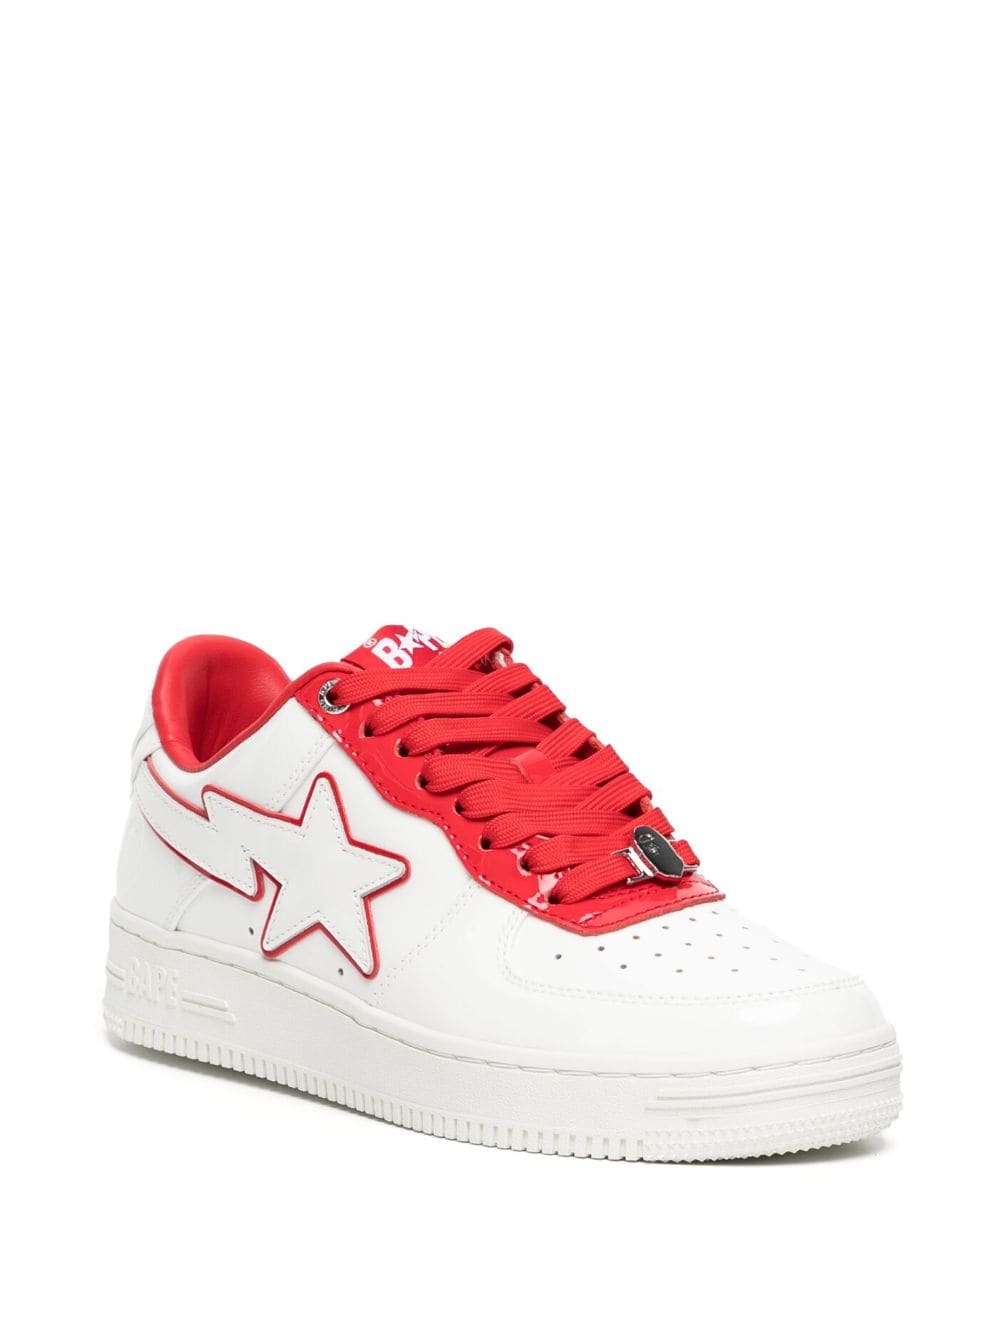 A BATHING APE® Bape White & Red Patent Leather Sneakers - Farfetch